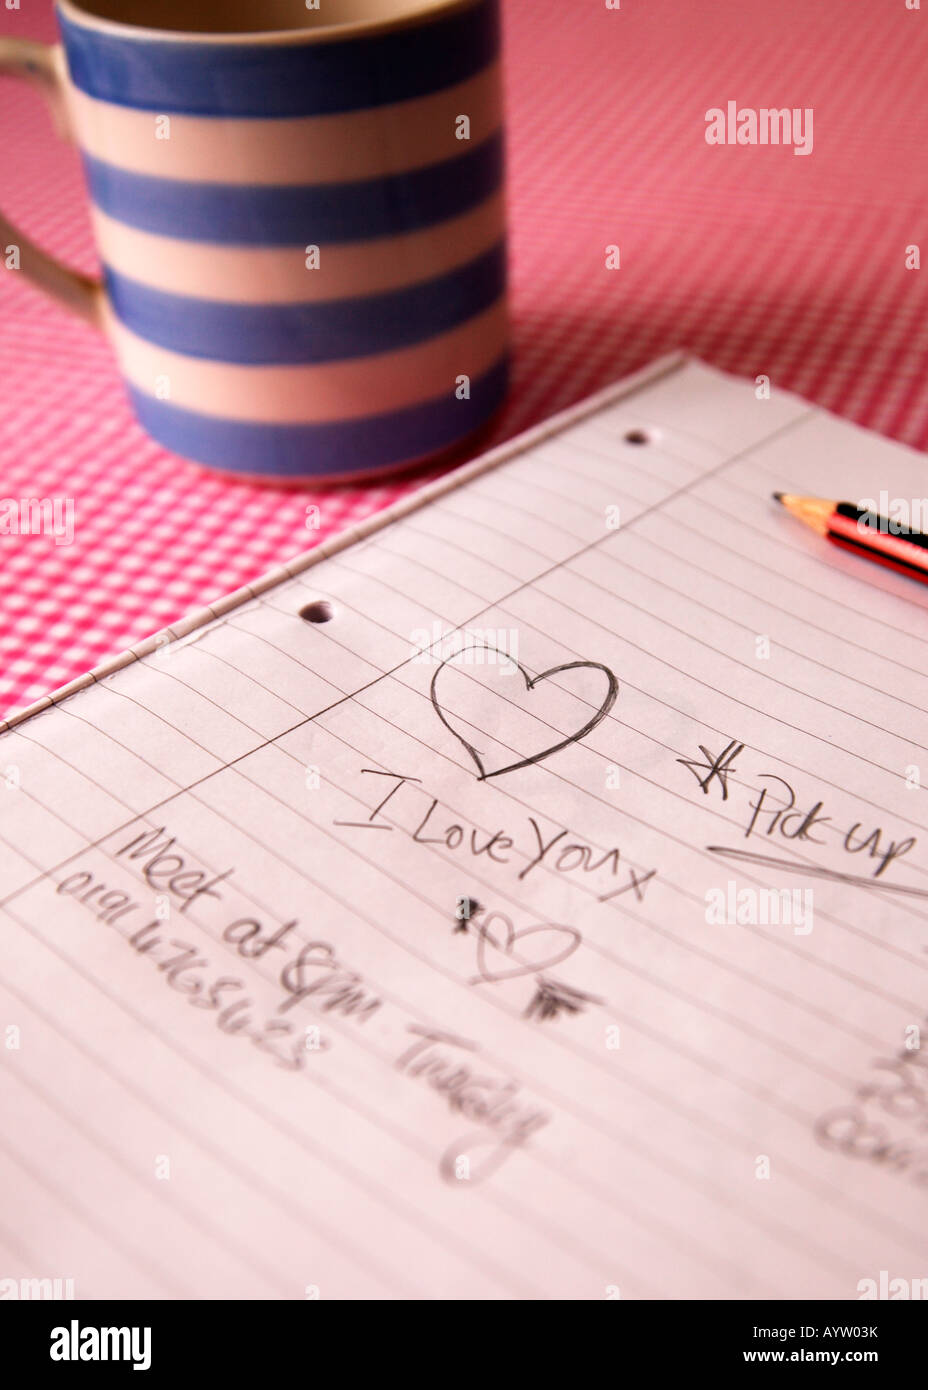 I Love You Doodle on a lined pad, with pencil and retro mug Stock Photo